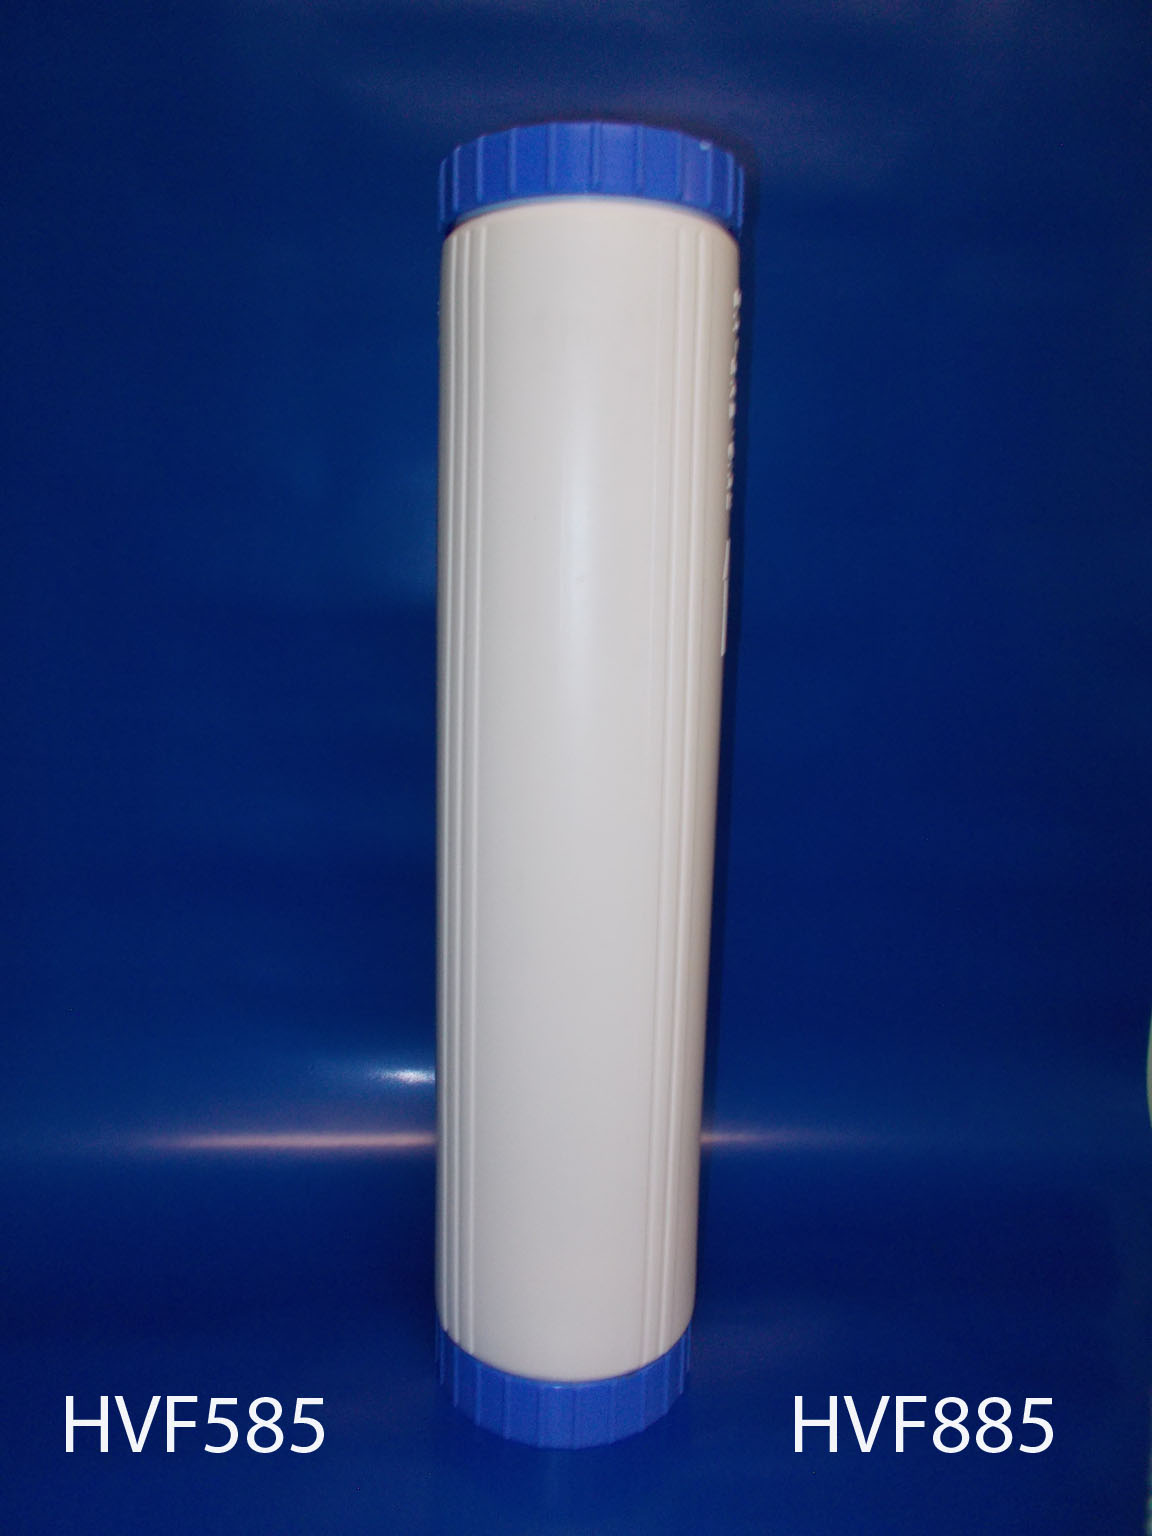 Replacement Iron Water Filter Cartridge removes iron and hydrogen sulfide